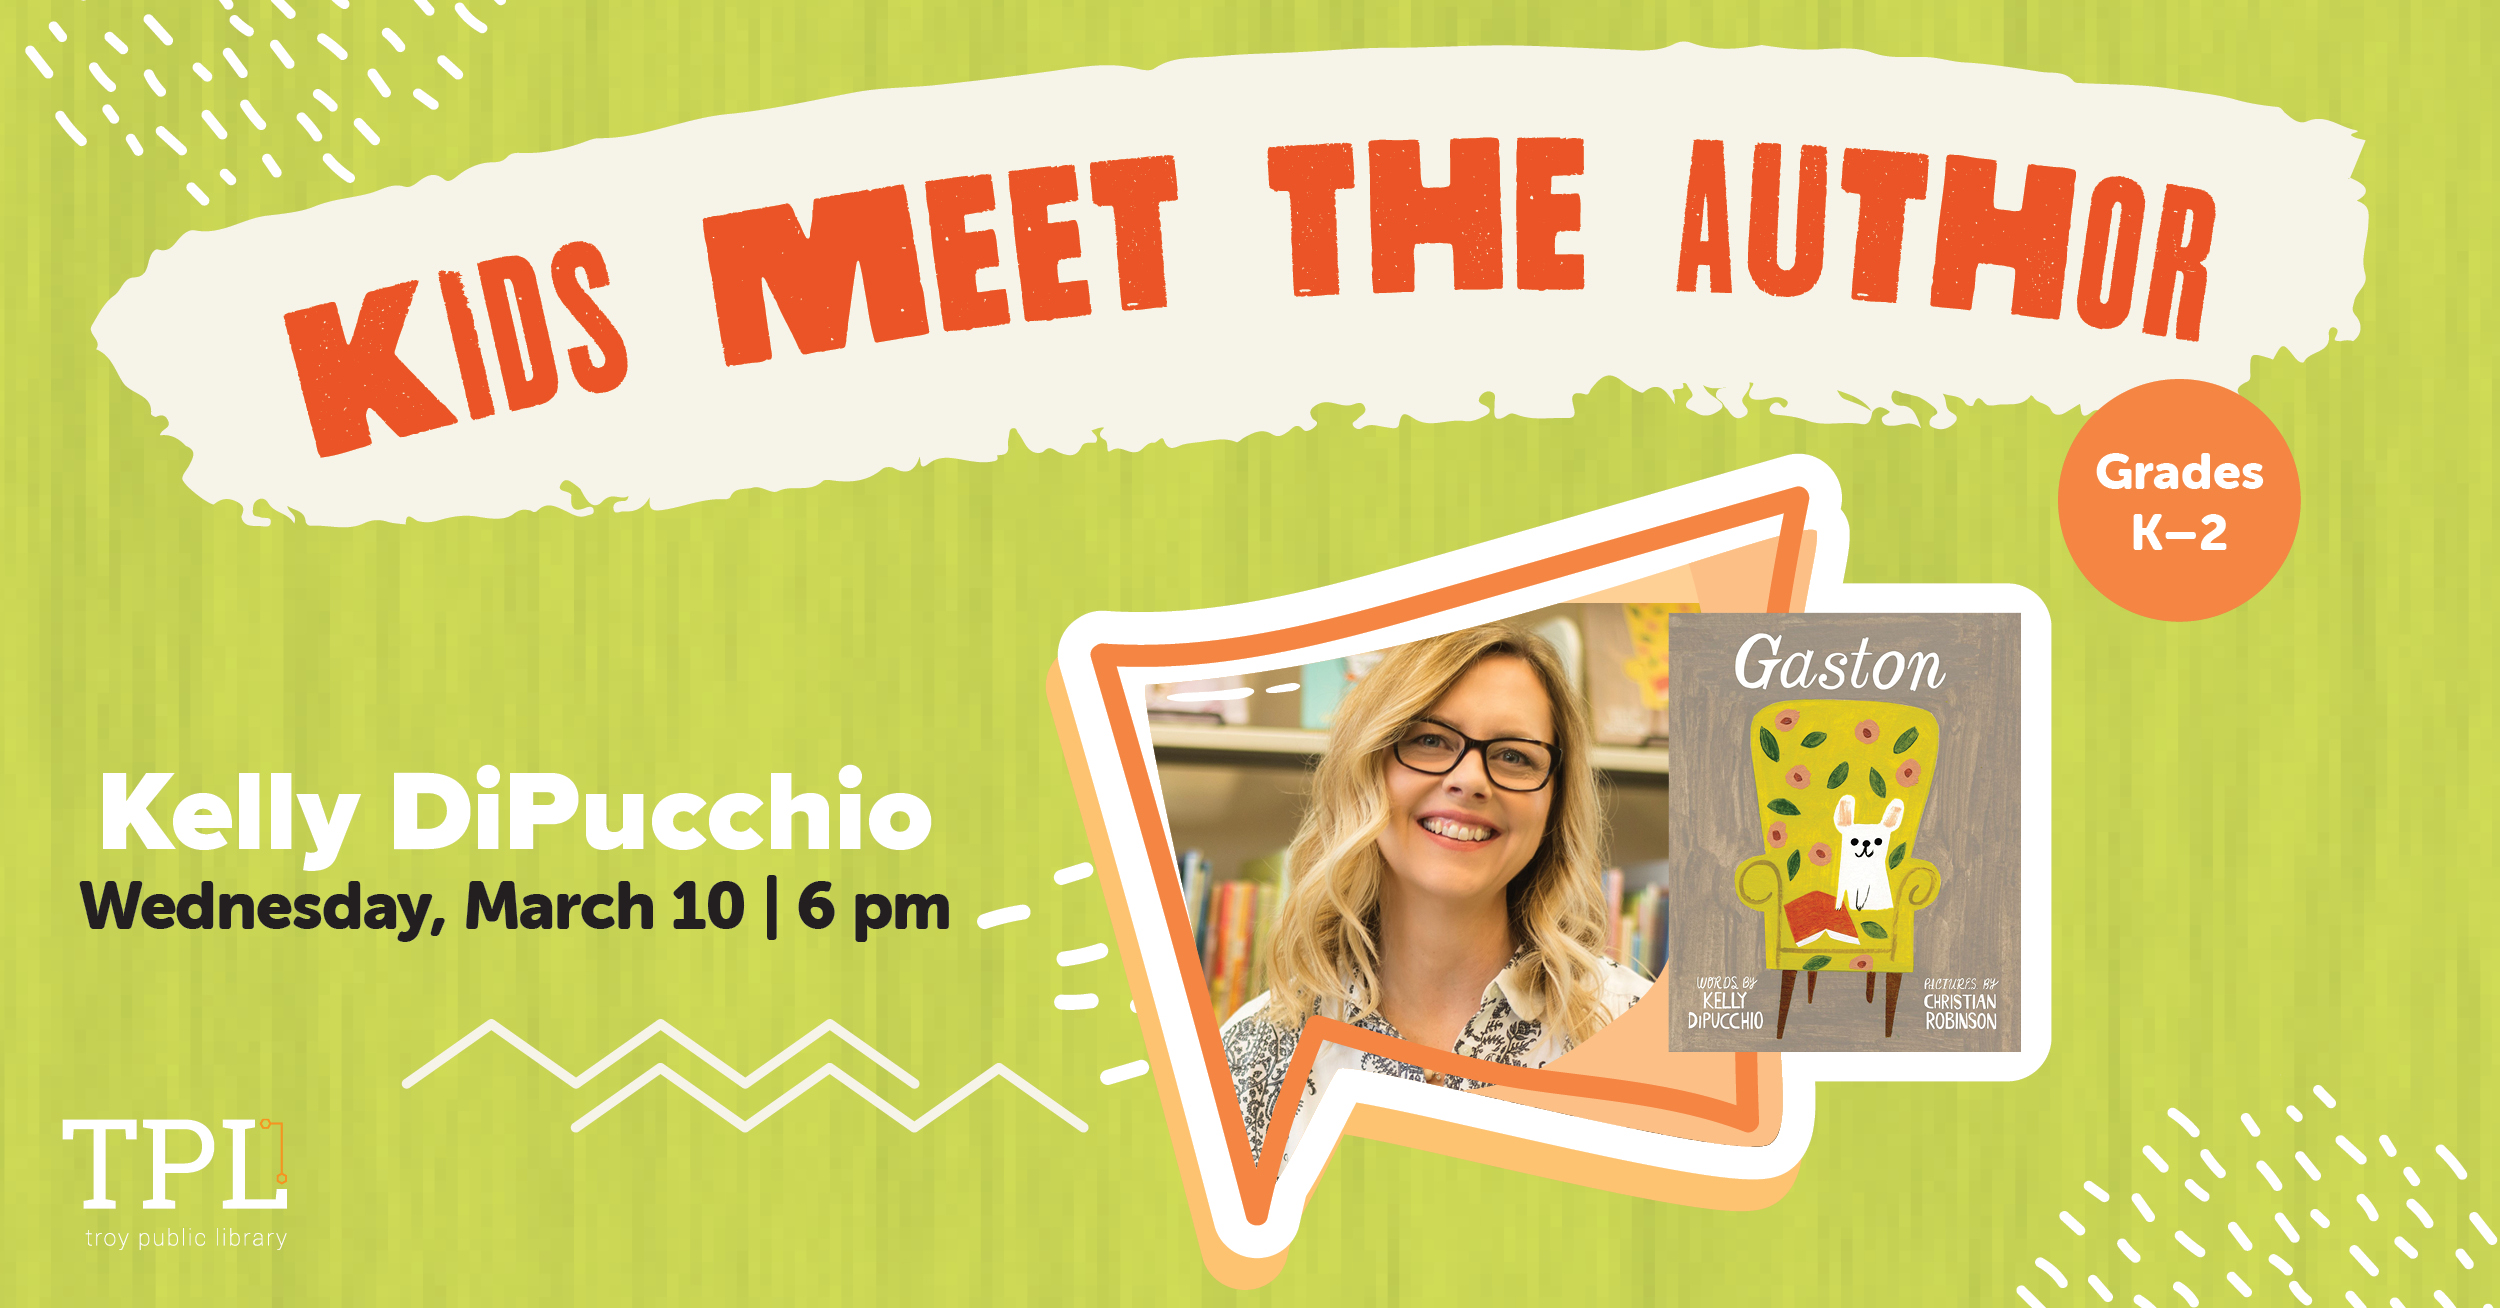 Kids Meet the Author. Kelly DiPucchio Tuesday, March 10 at 6pm. Grades K to 2